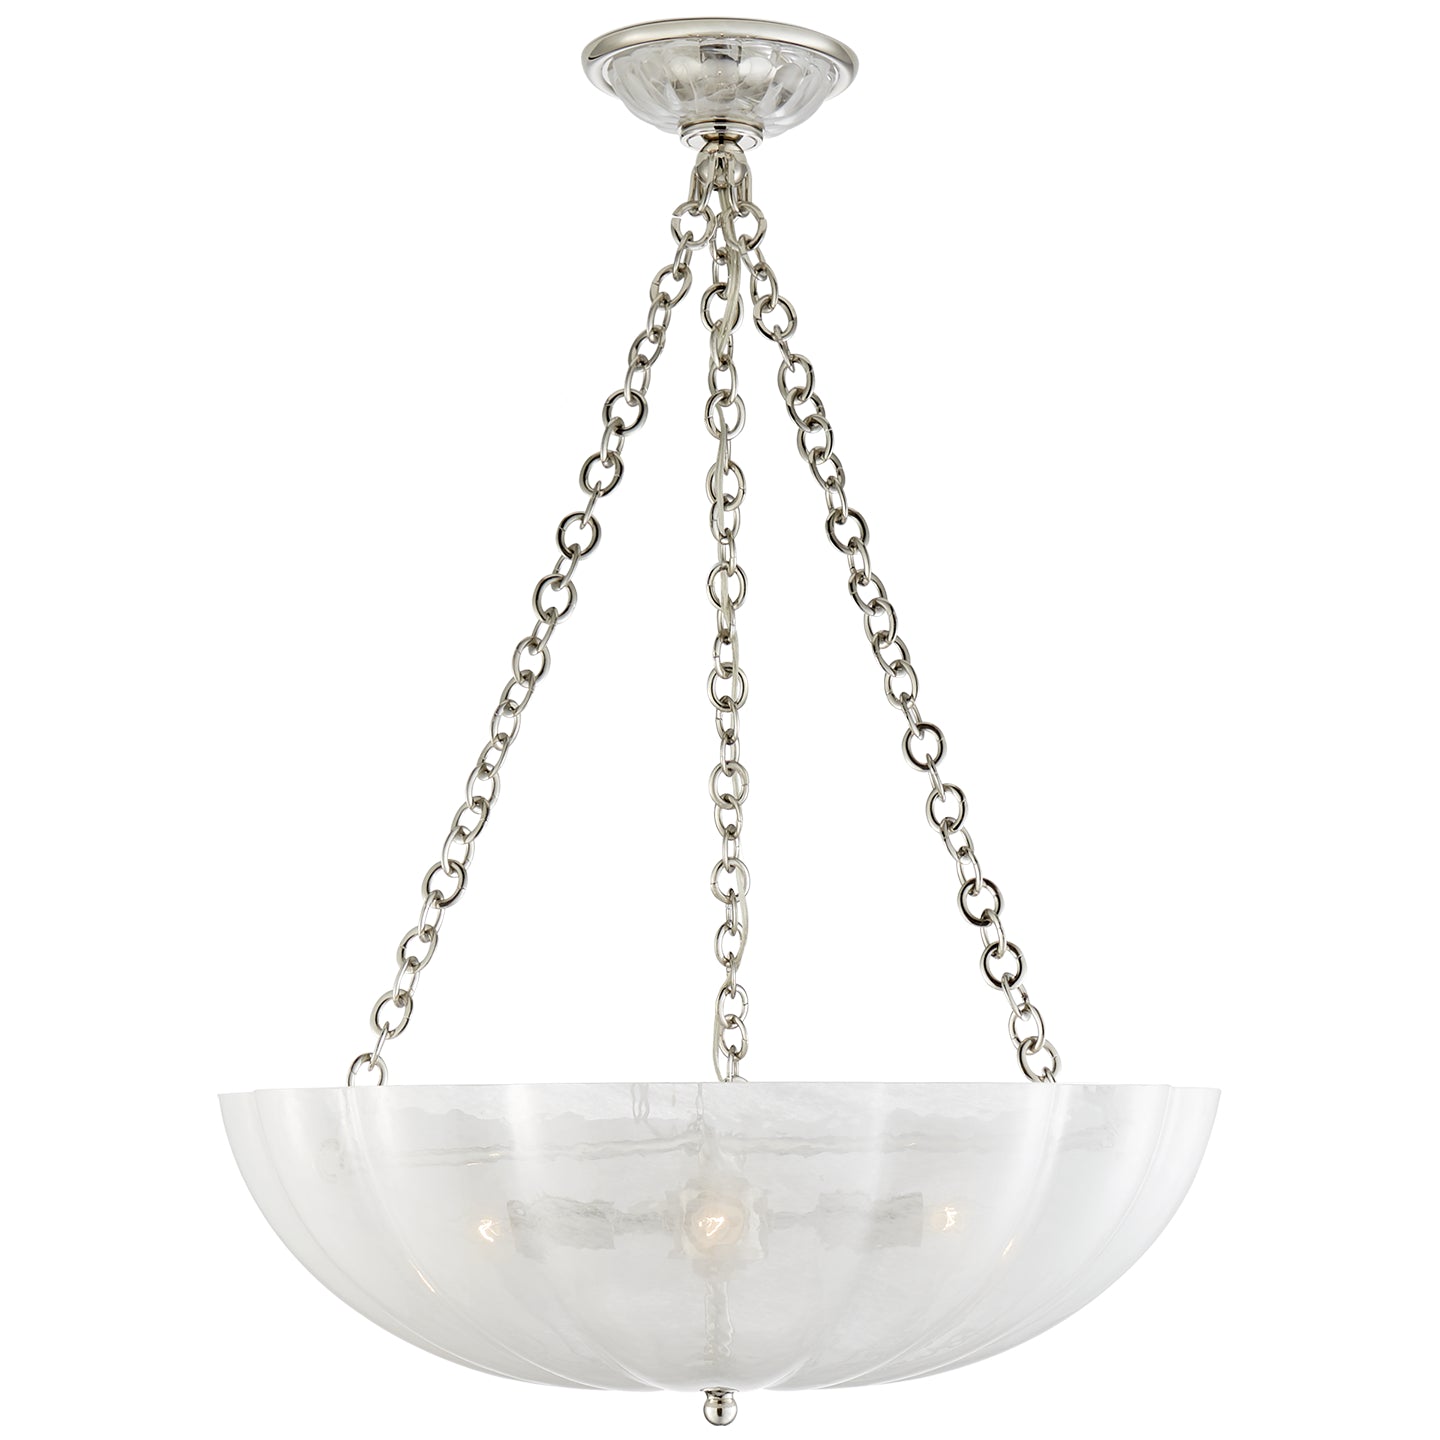 Load image into Gallery viewer, Visual Comfort Signature - ARN 5111PN-WG - Four Light Chandelier - Rosehill - Polished Nickel
